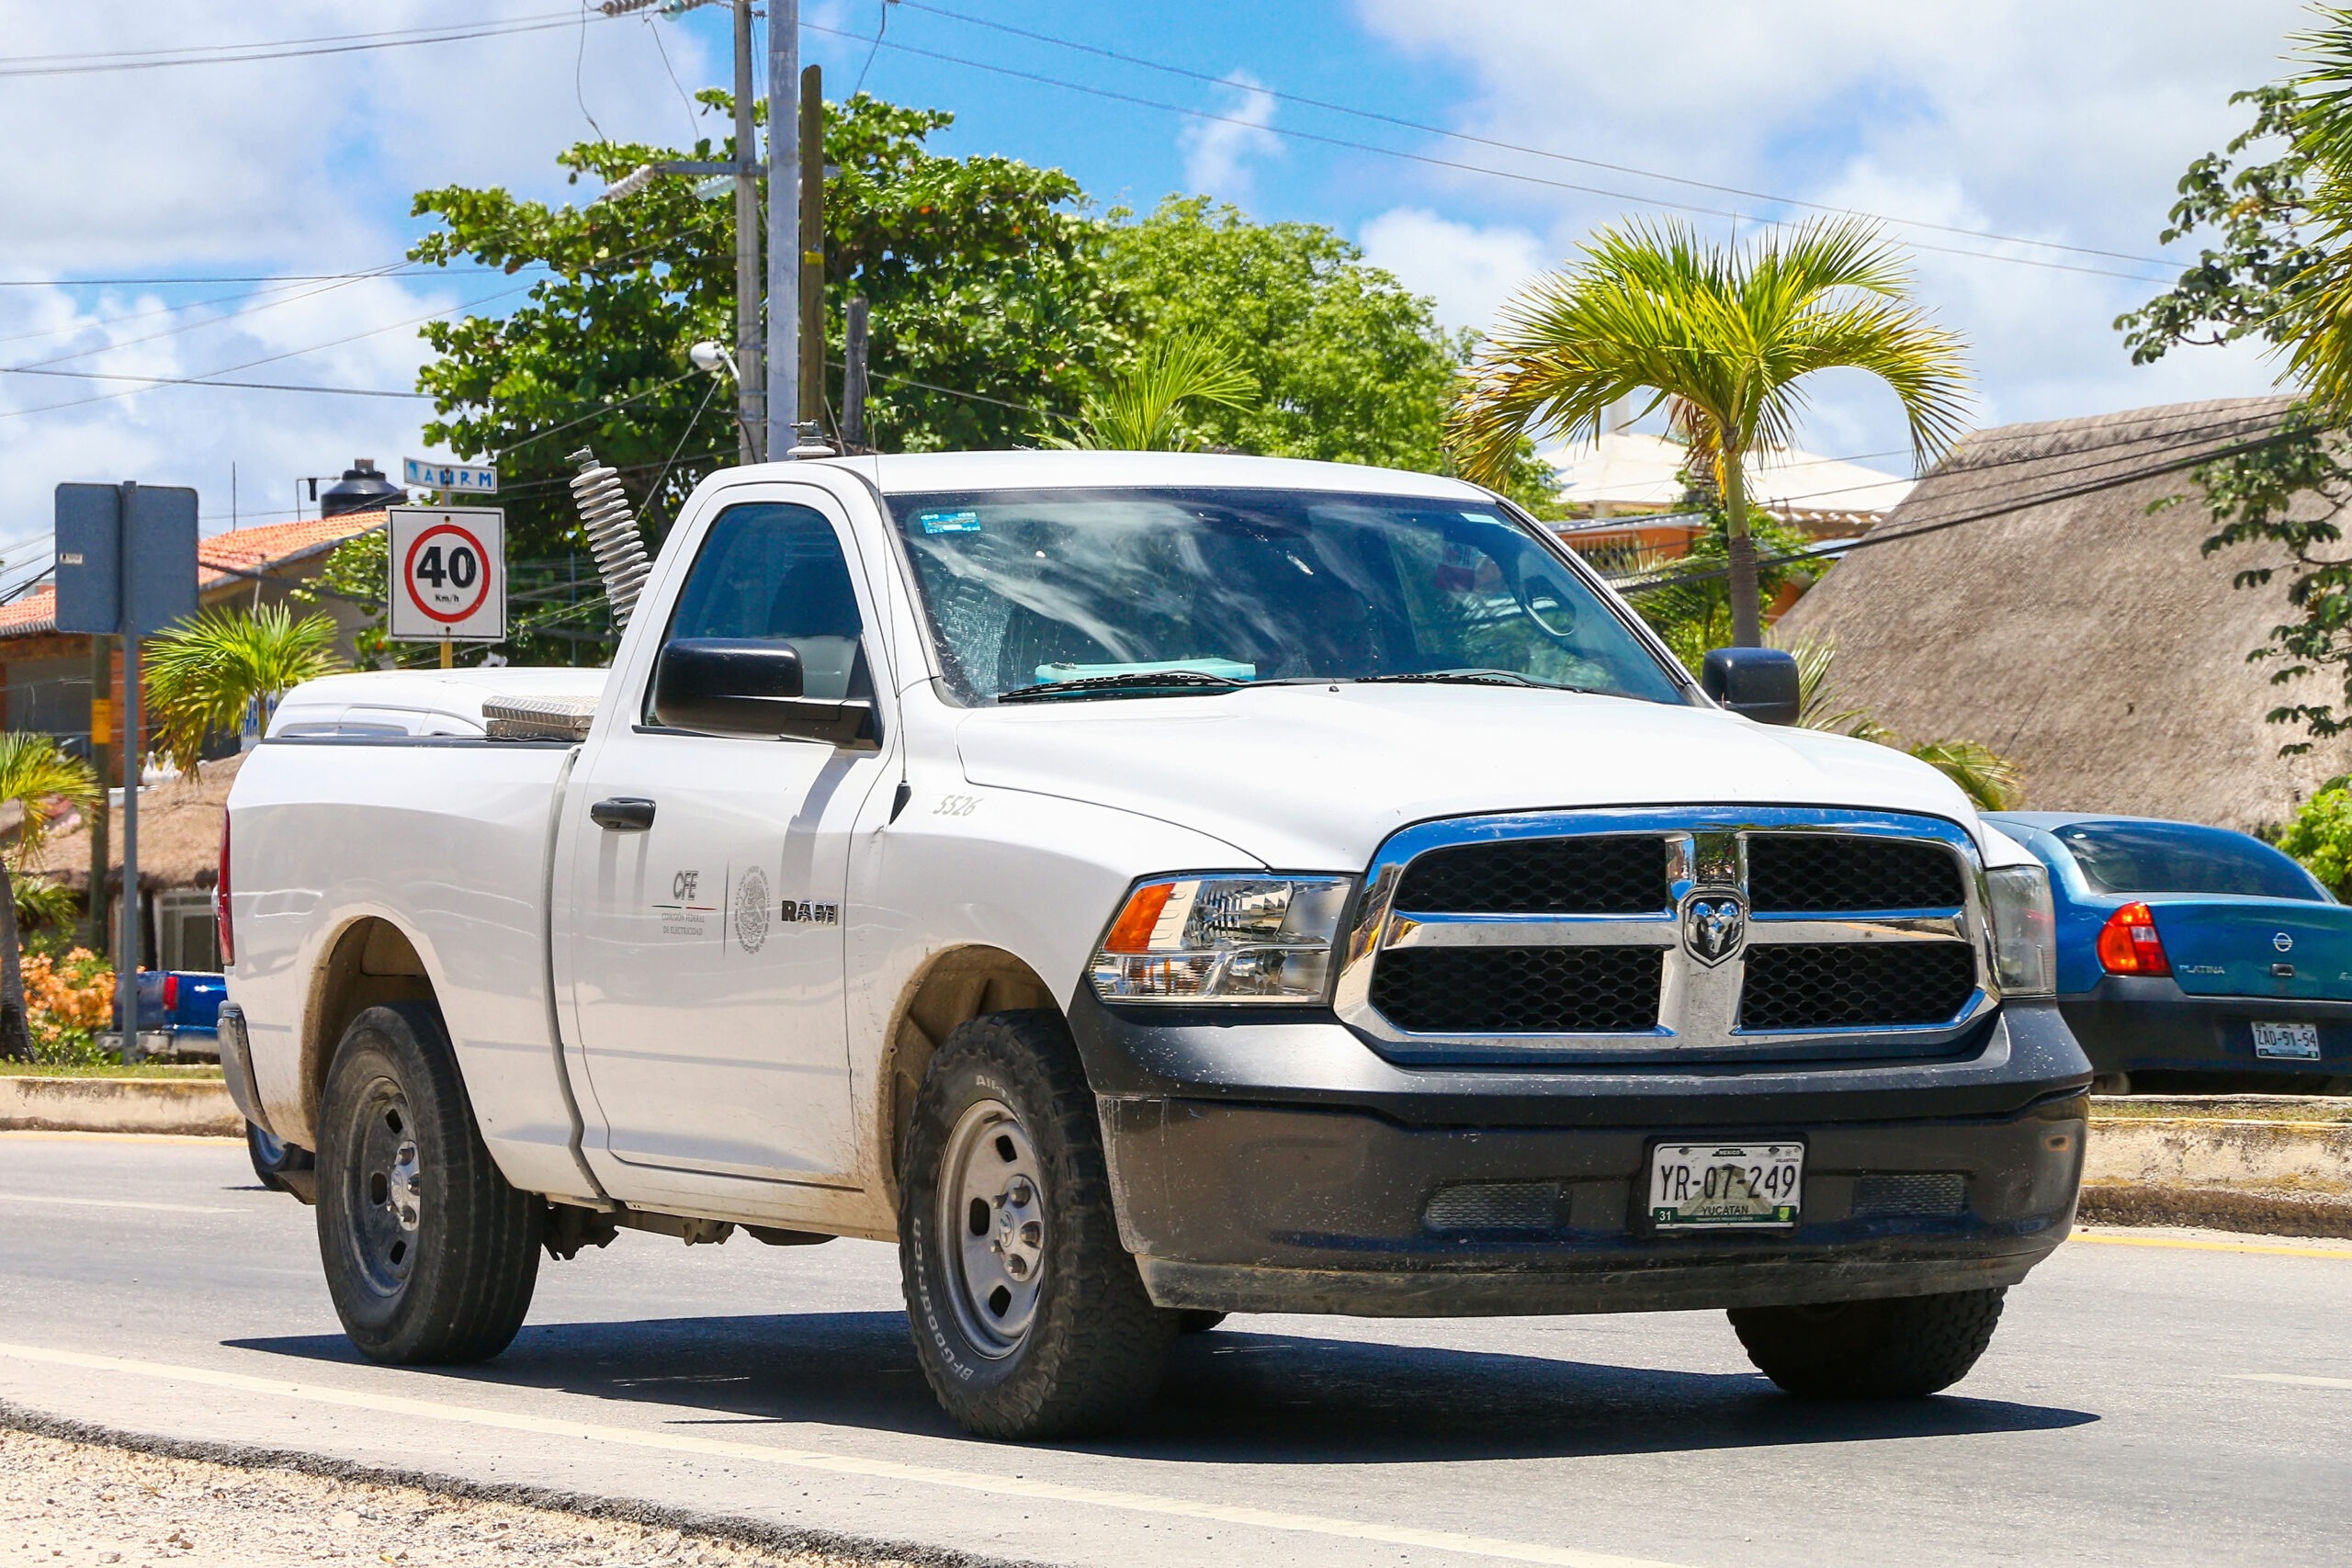 Tulum, Mexico - May 17, 2017: White pickup truck Dodge Ram in a city street.